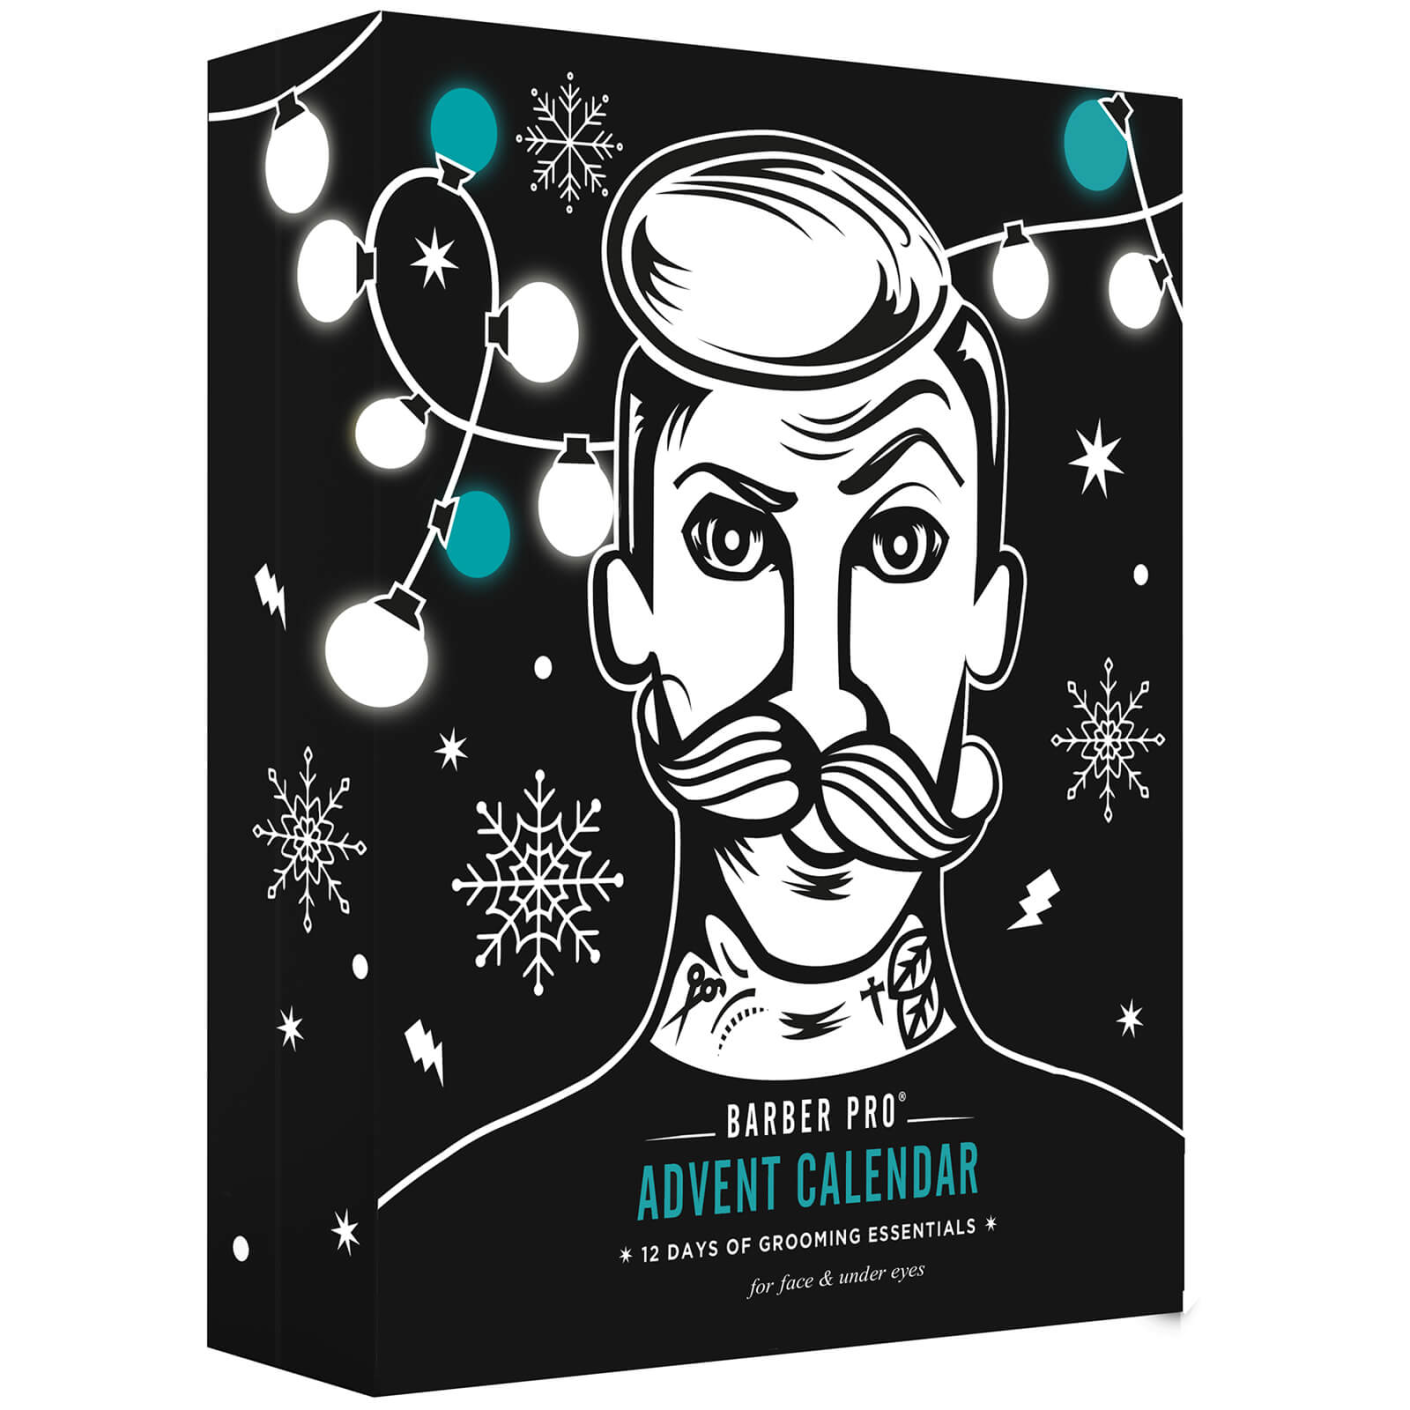 BARBER PRO Advent Calendar Reviews Get All The Details At Hello